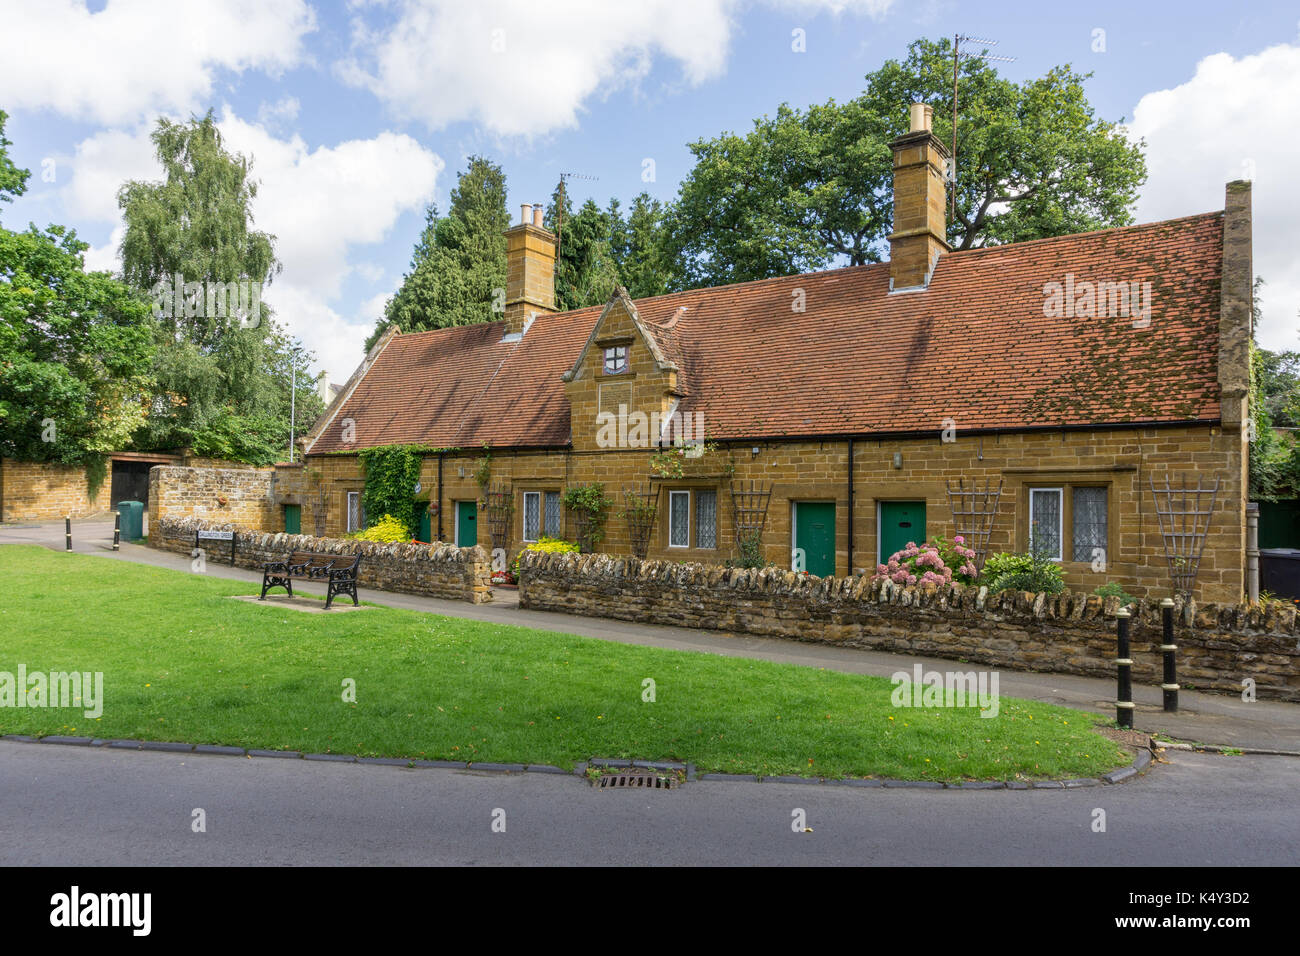 Raynsford Almshouses dating from 1673 in the village of Dallington, Northampton, UK; now residential accommodation for the elderly Stock Photo